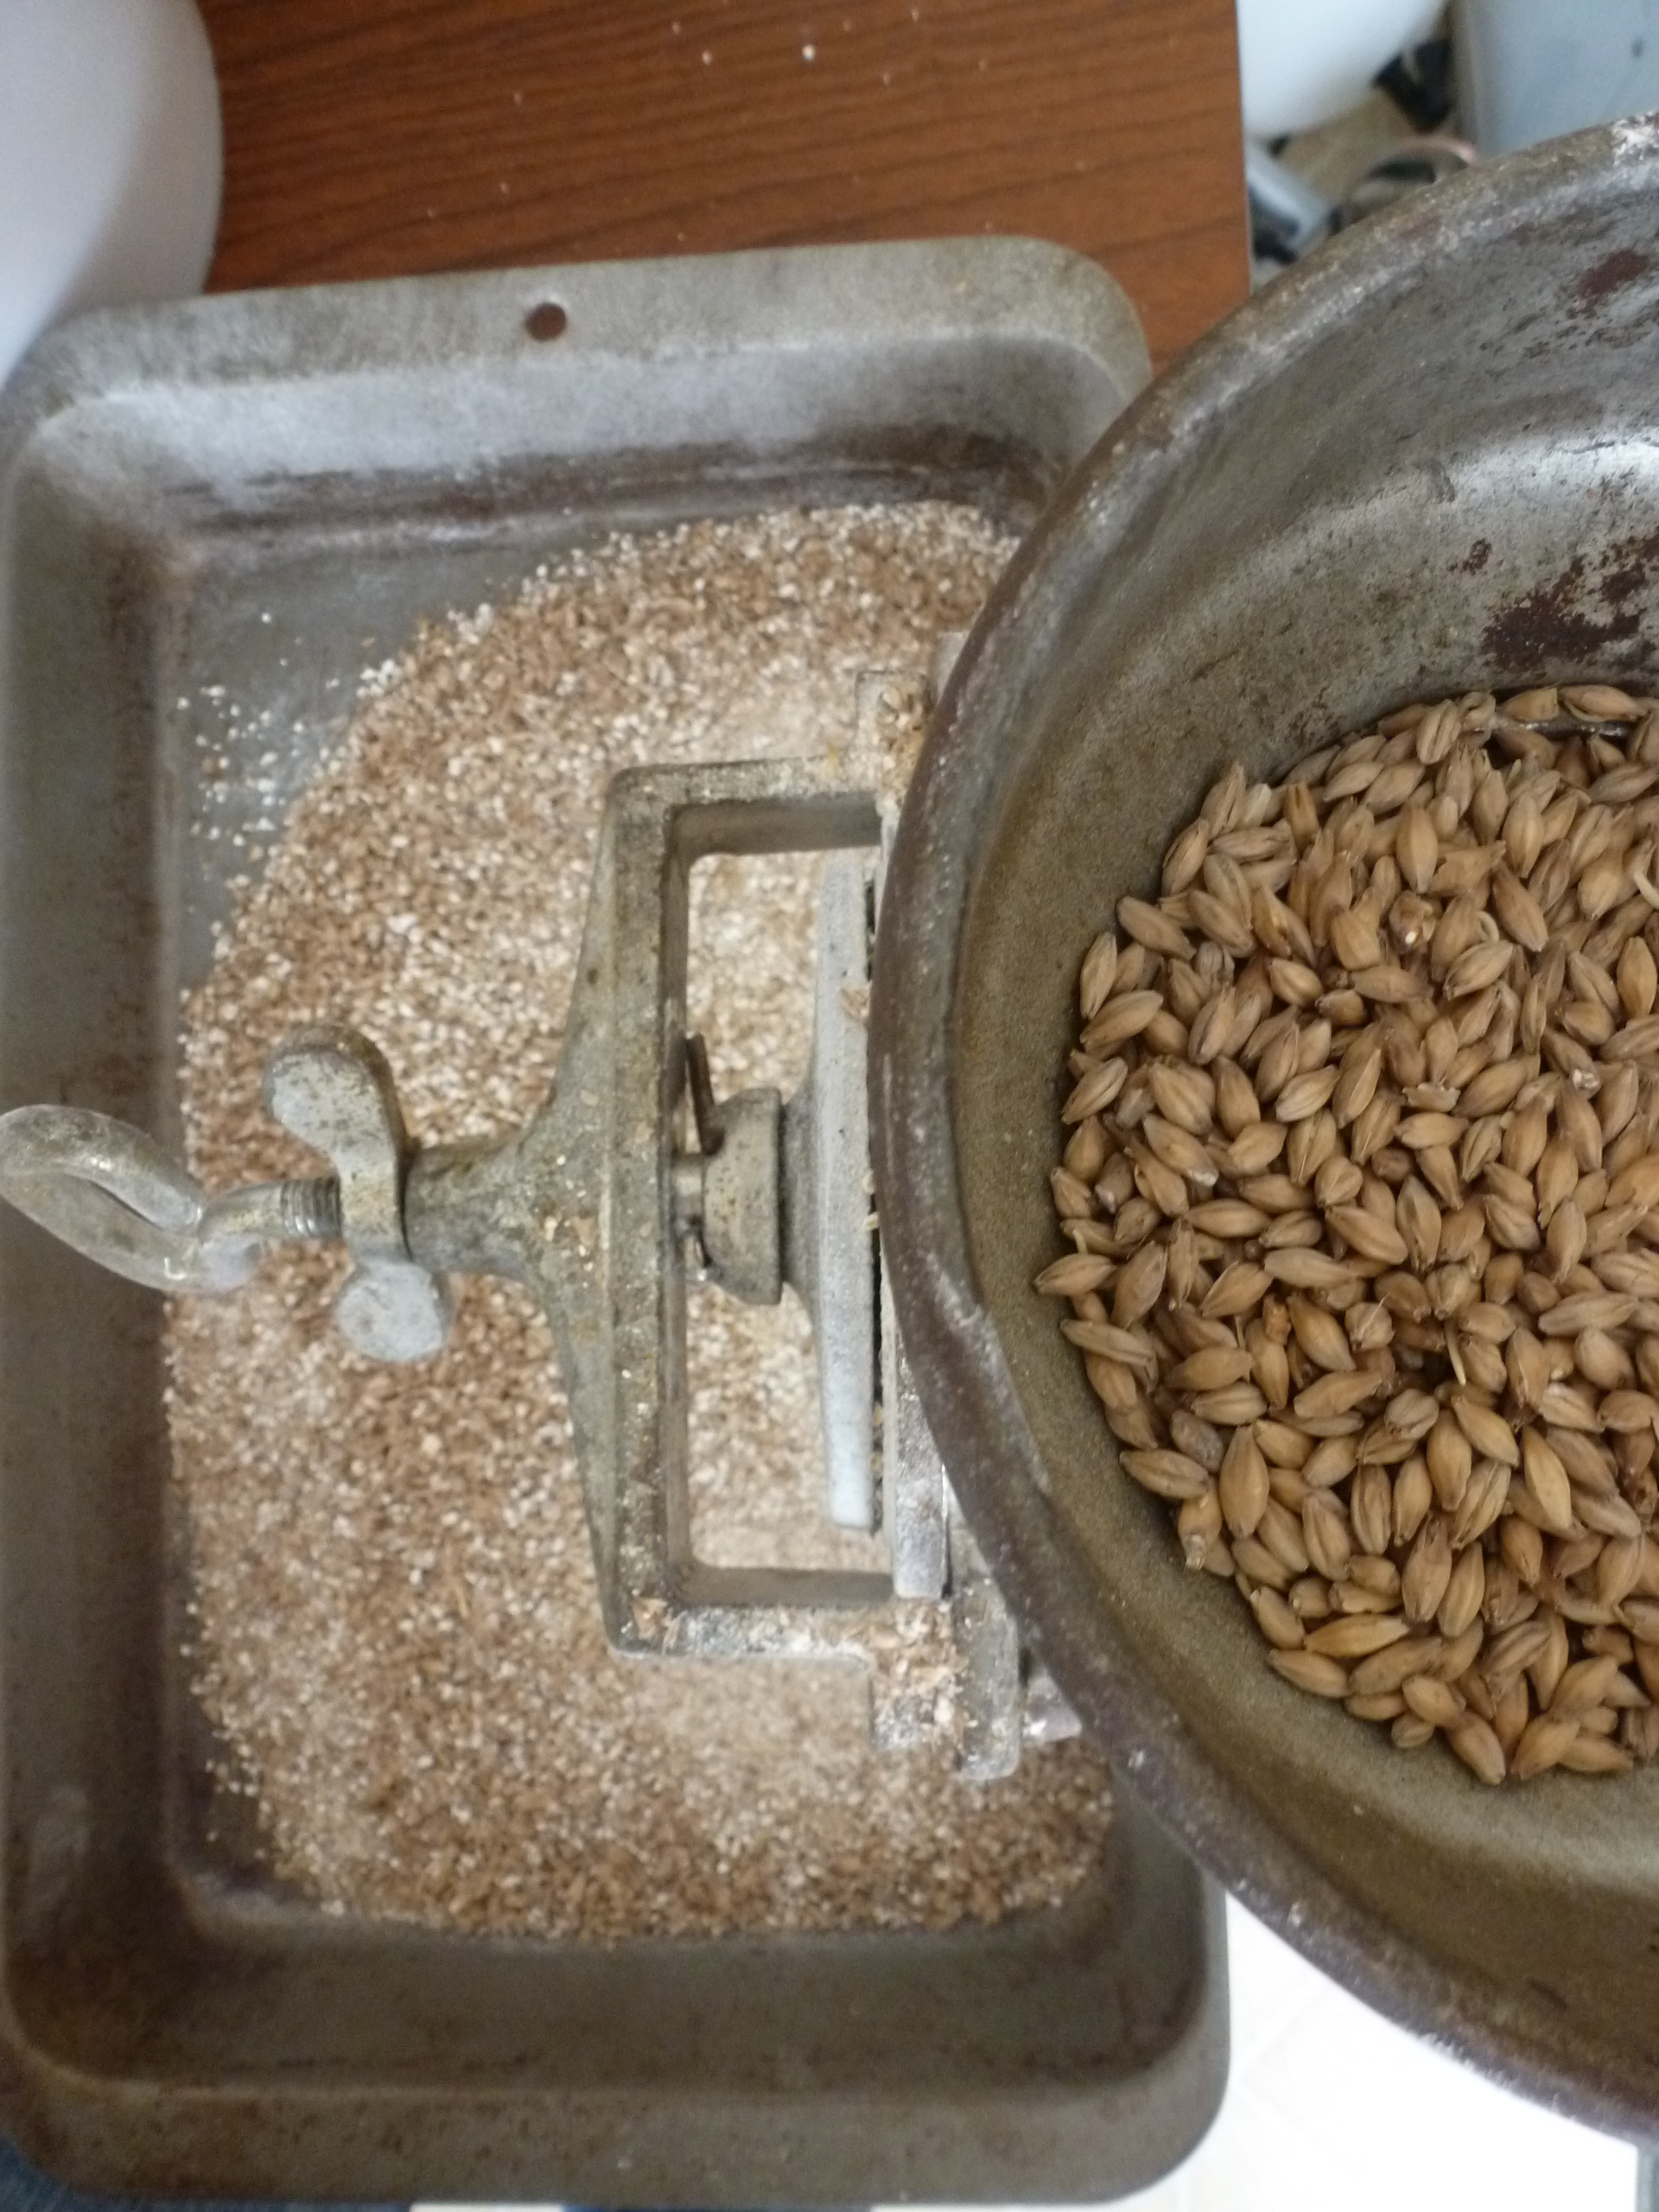 Grinding the malt into grist using an old-timey grain mill